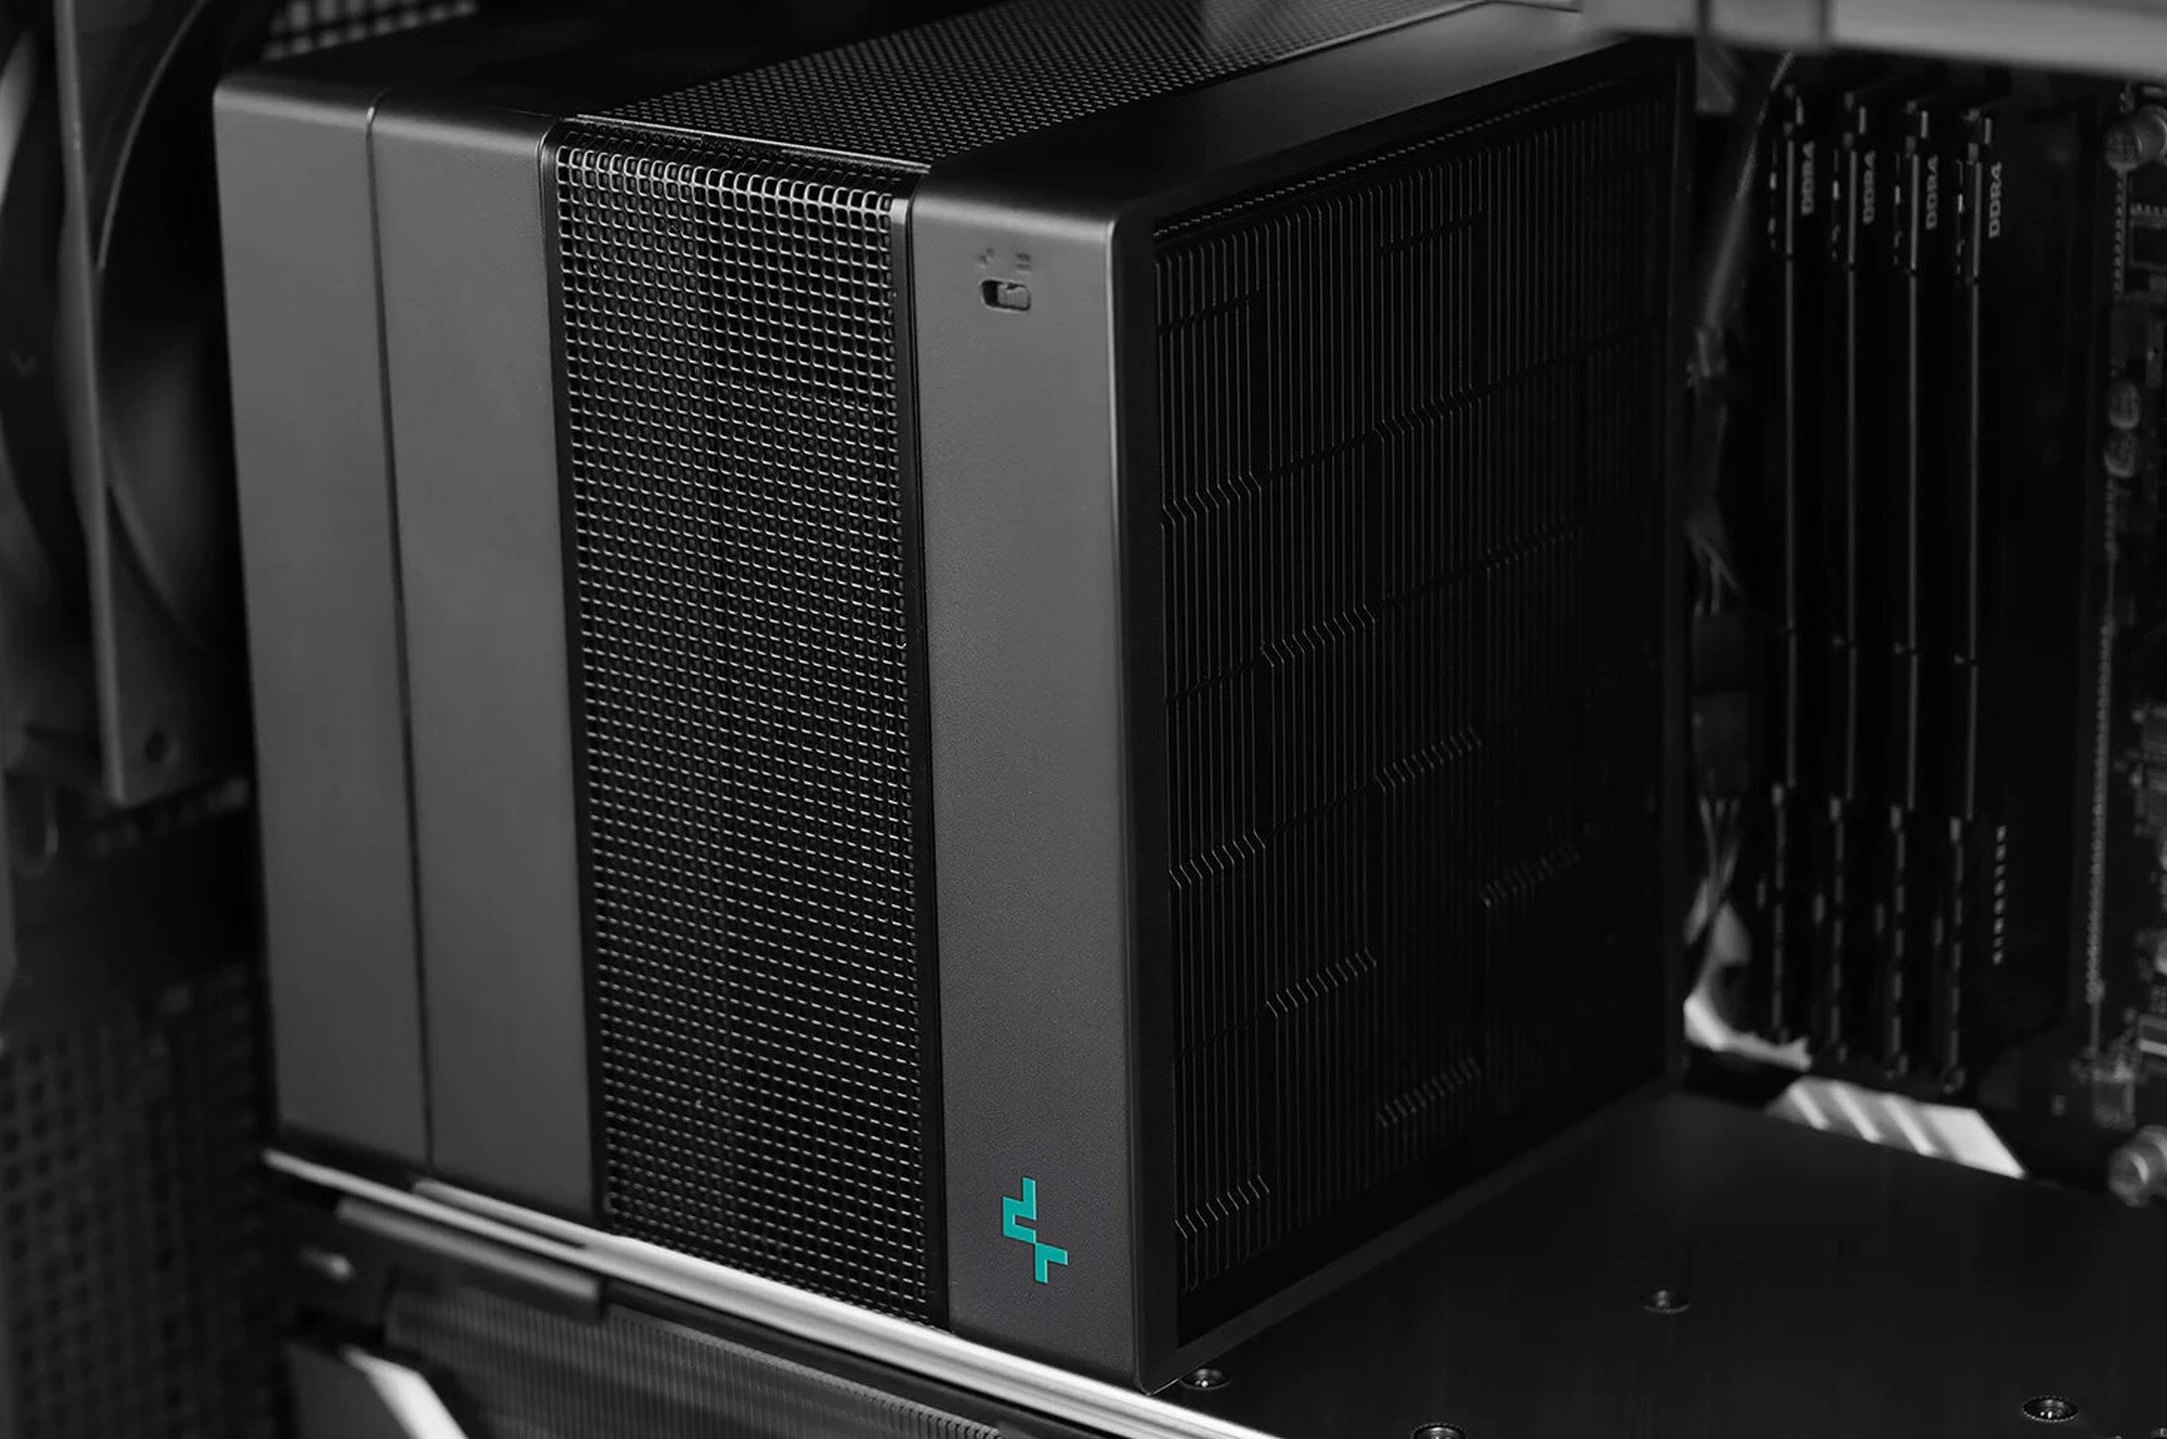 With Assassin IV, DeepCool changes customs of dual-tower coolers